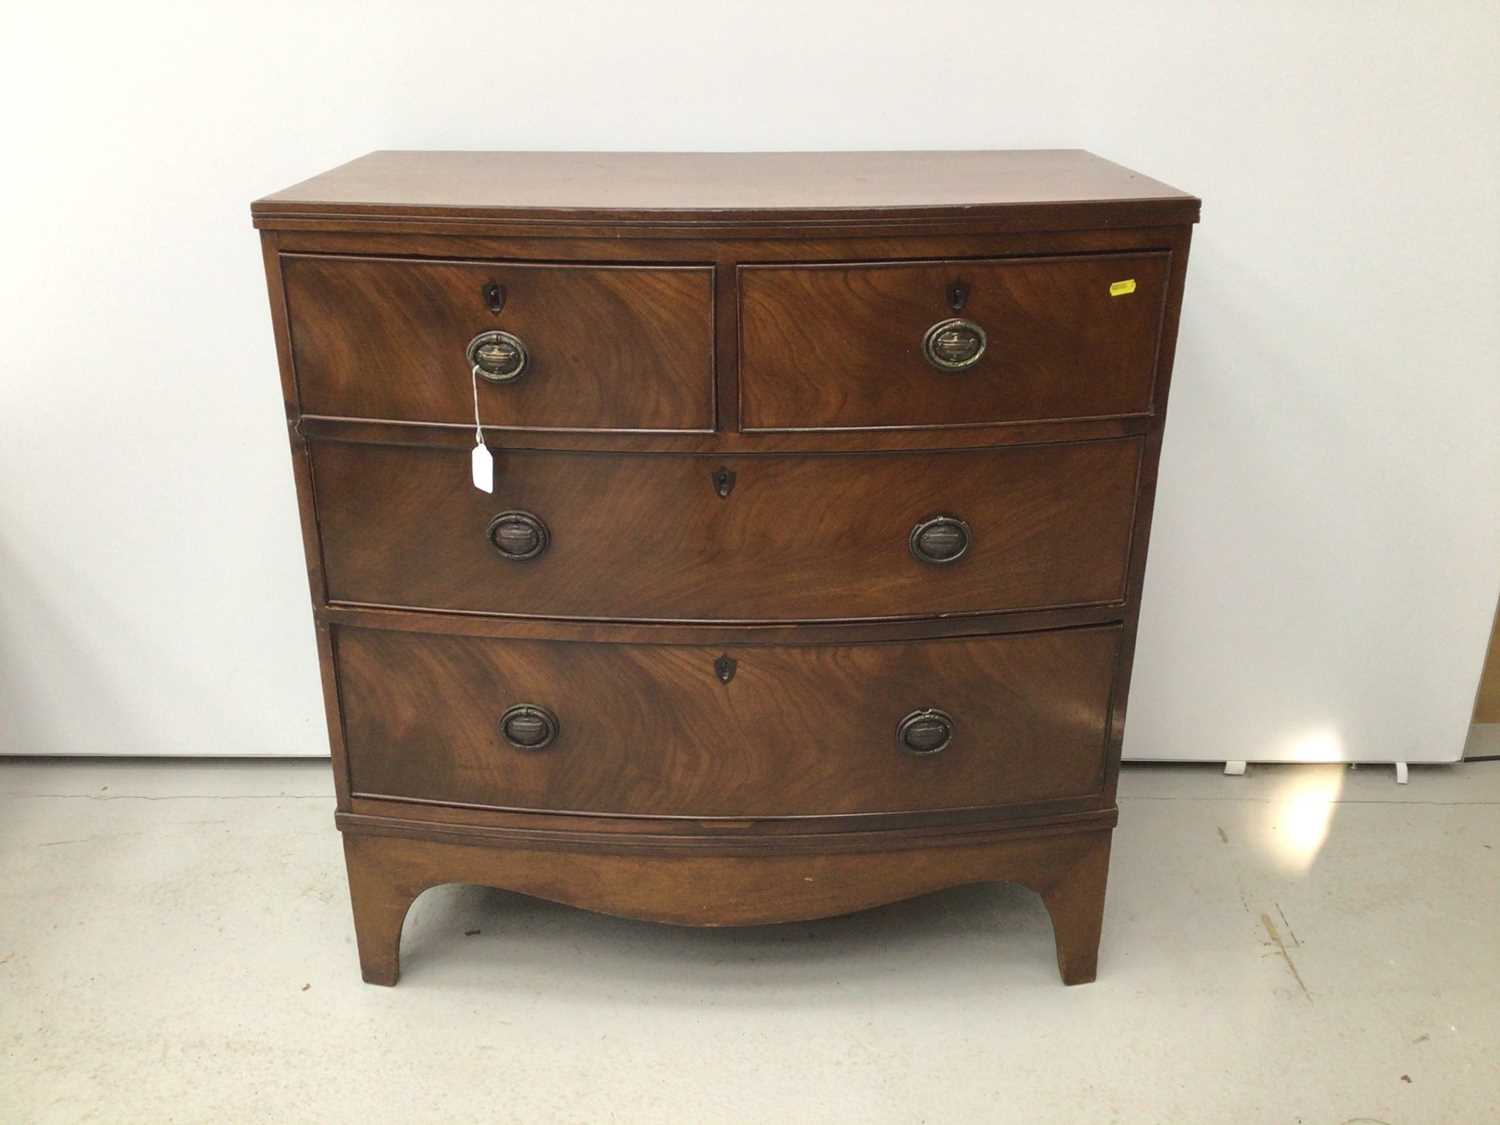 Lot 98 - 19th century mahogany bowfront chest of drawers